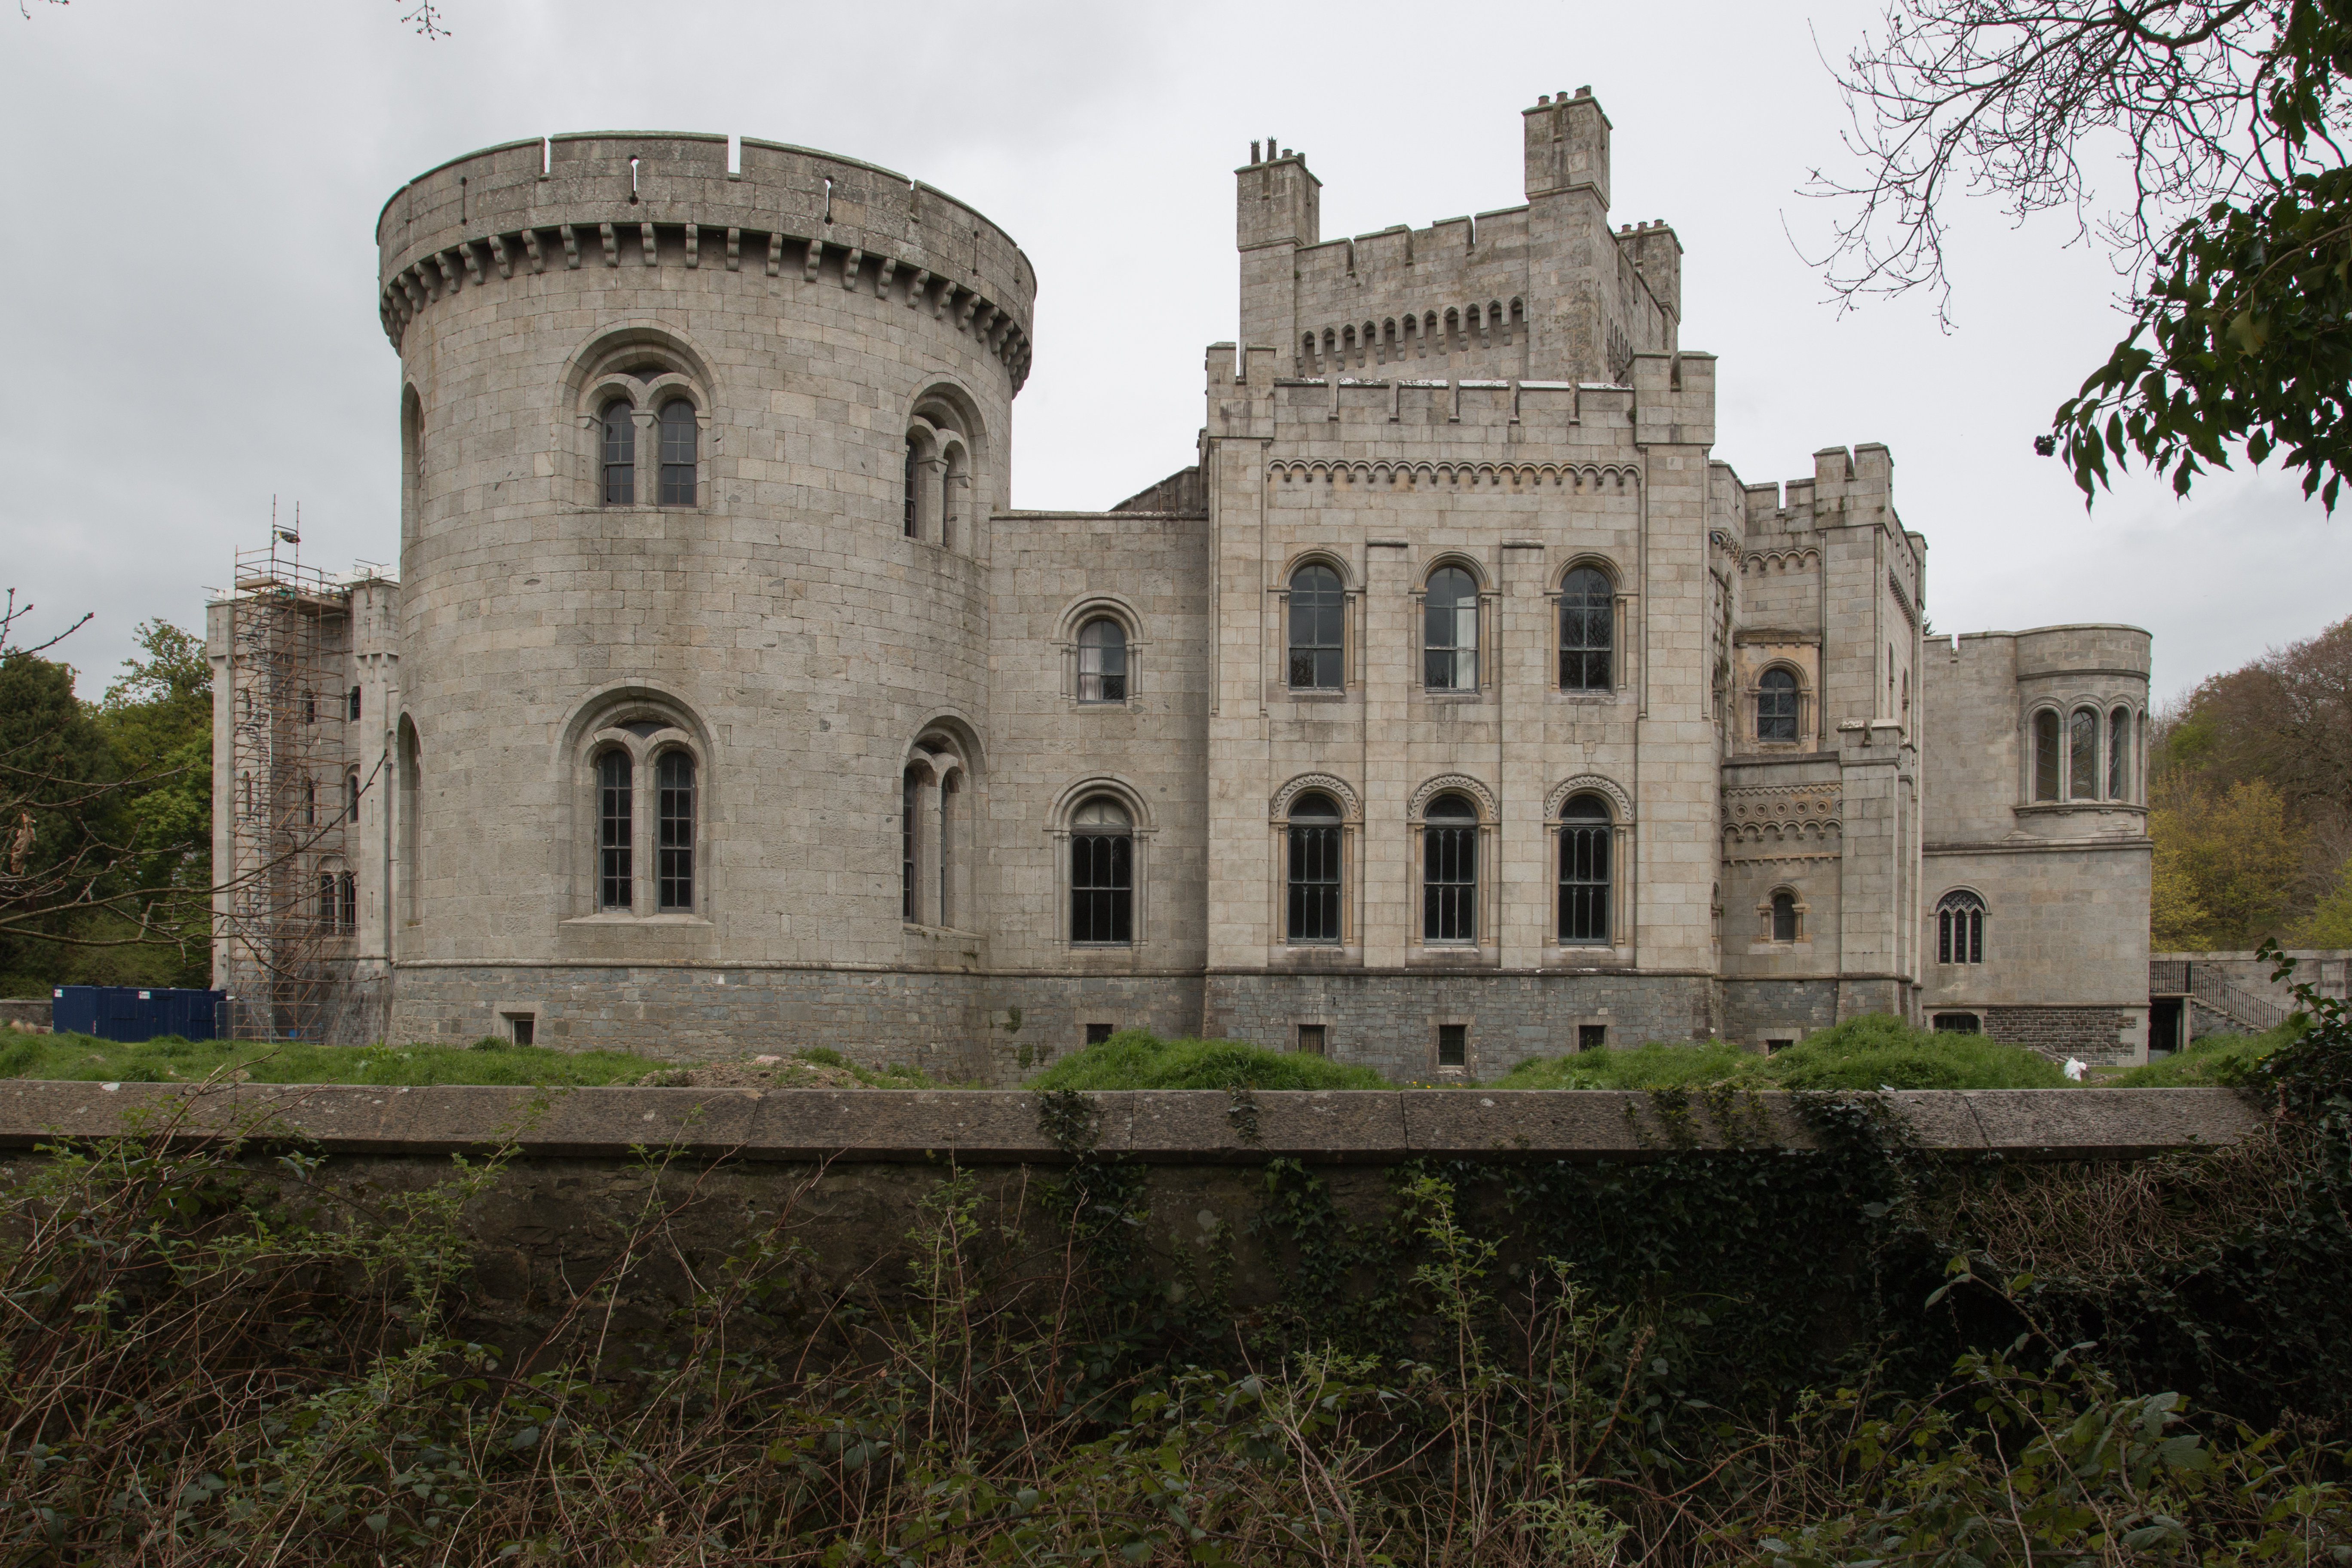 Gosford Castle. 19th-century country house situated in Gosford, a townland of Markethill, County Armagh, Northern Ireland